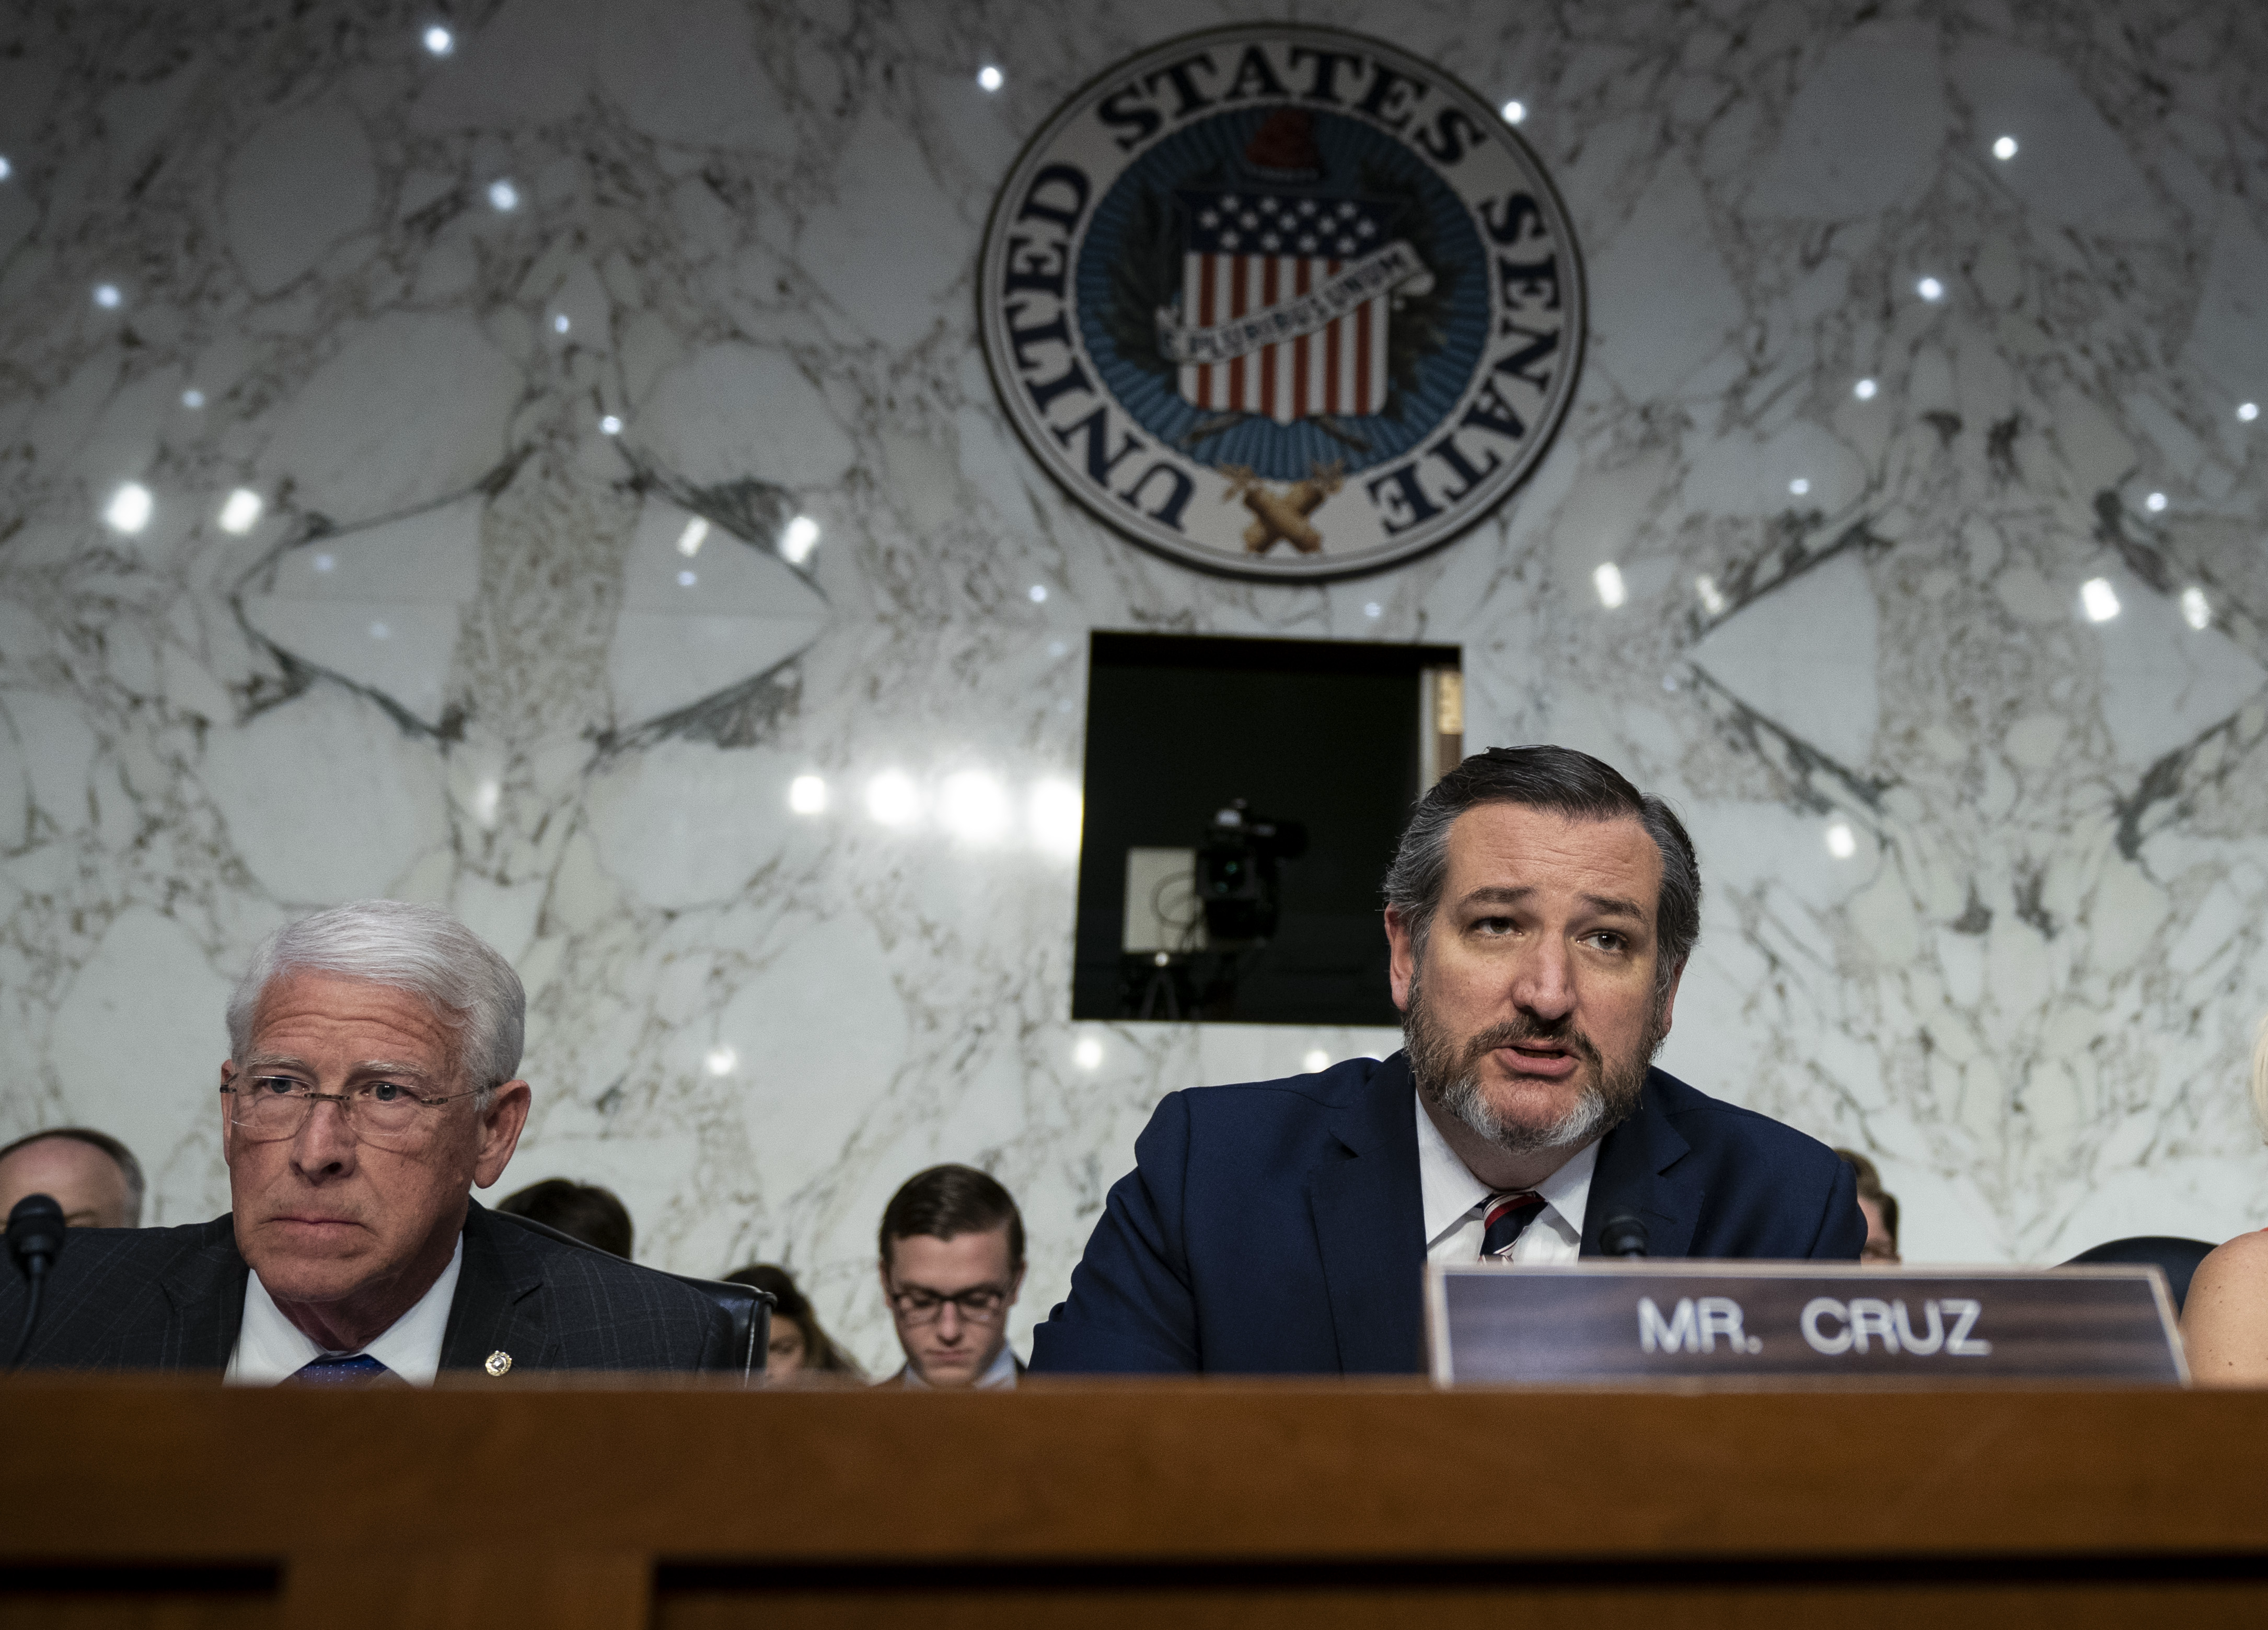 Sen. Roger Wicker (R-MS) and Sen. Ted Cruz (R-TX) are shown at a 2019 hearing. Both senators harshly criticized big technology companies at the 2021 confirmation hearing for Lina Khan to serve on the Federal Trade Commission.